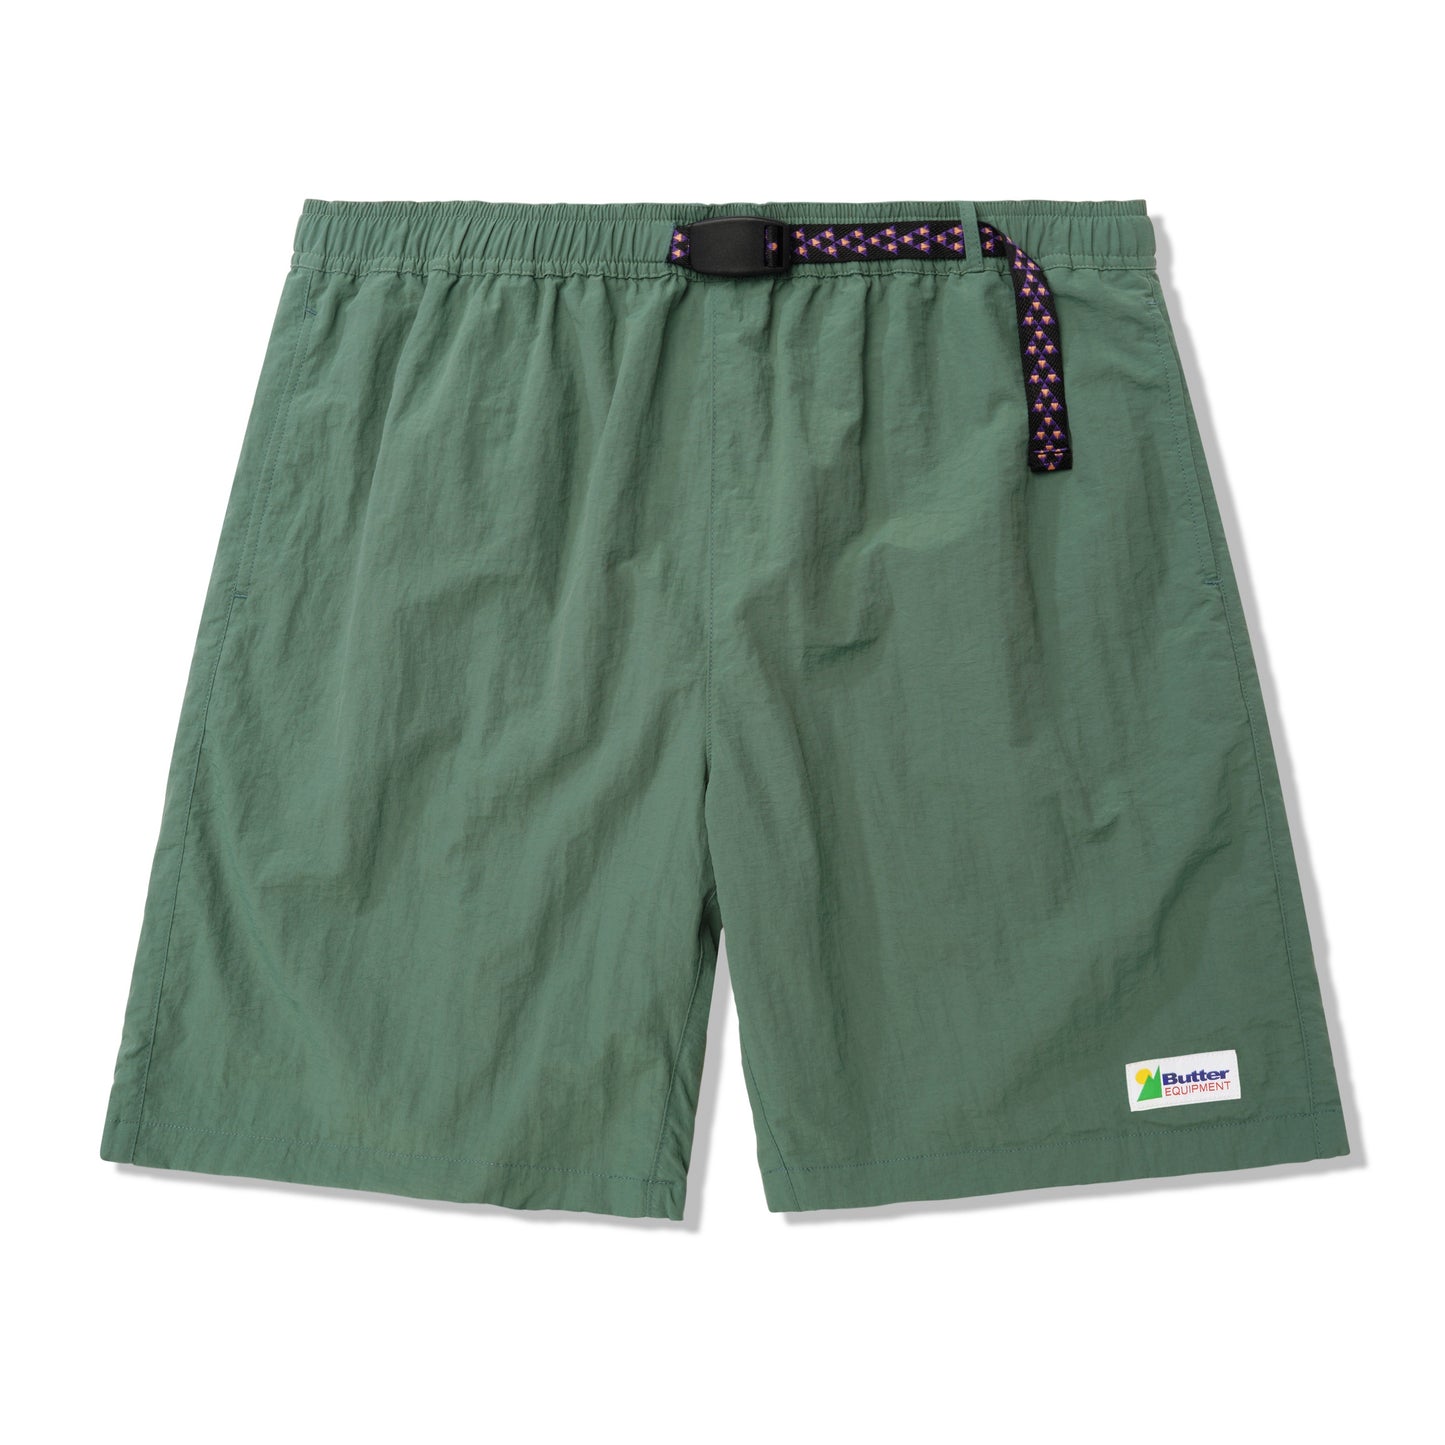 Equipment Shorts - Forest